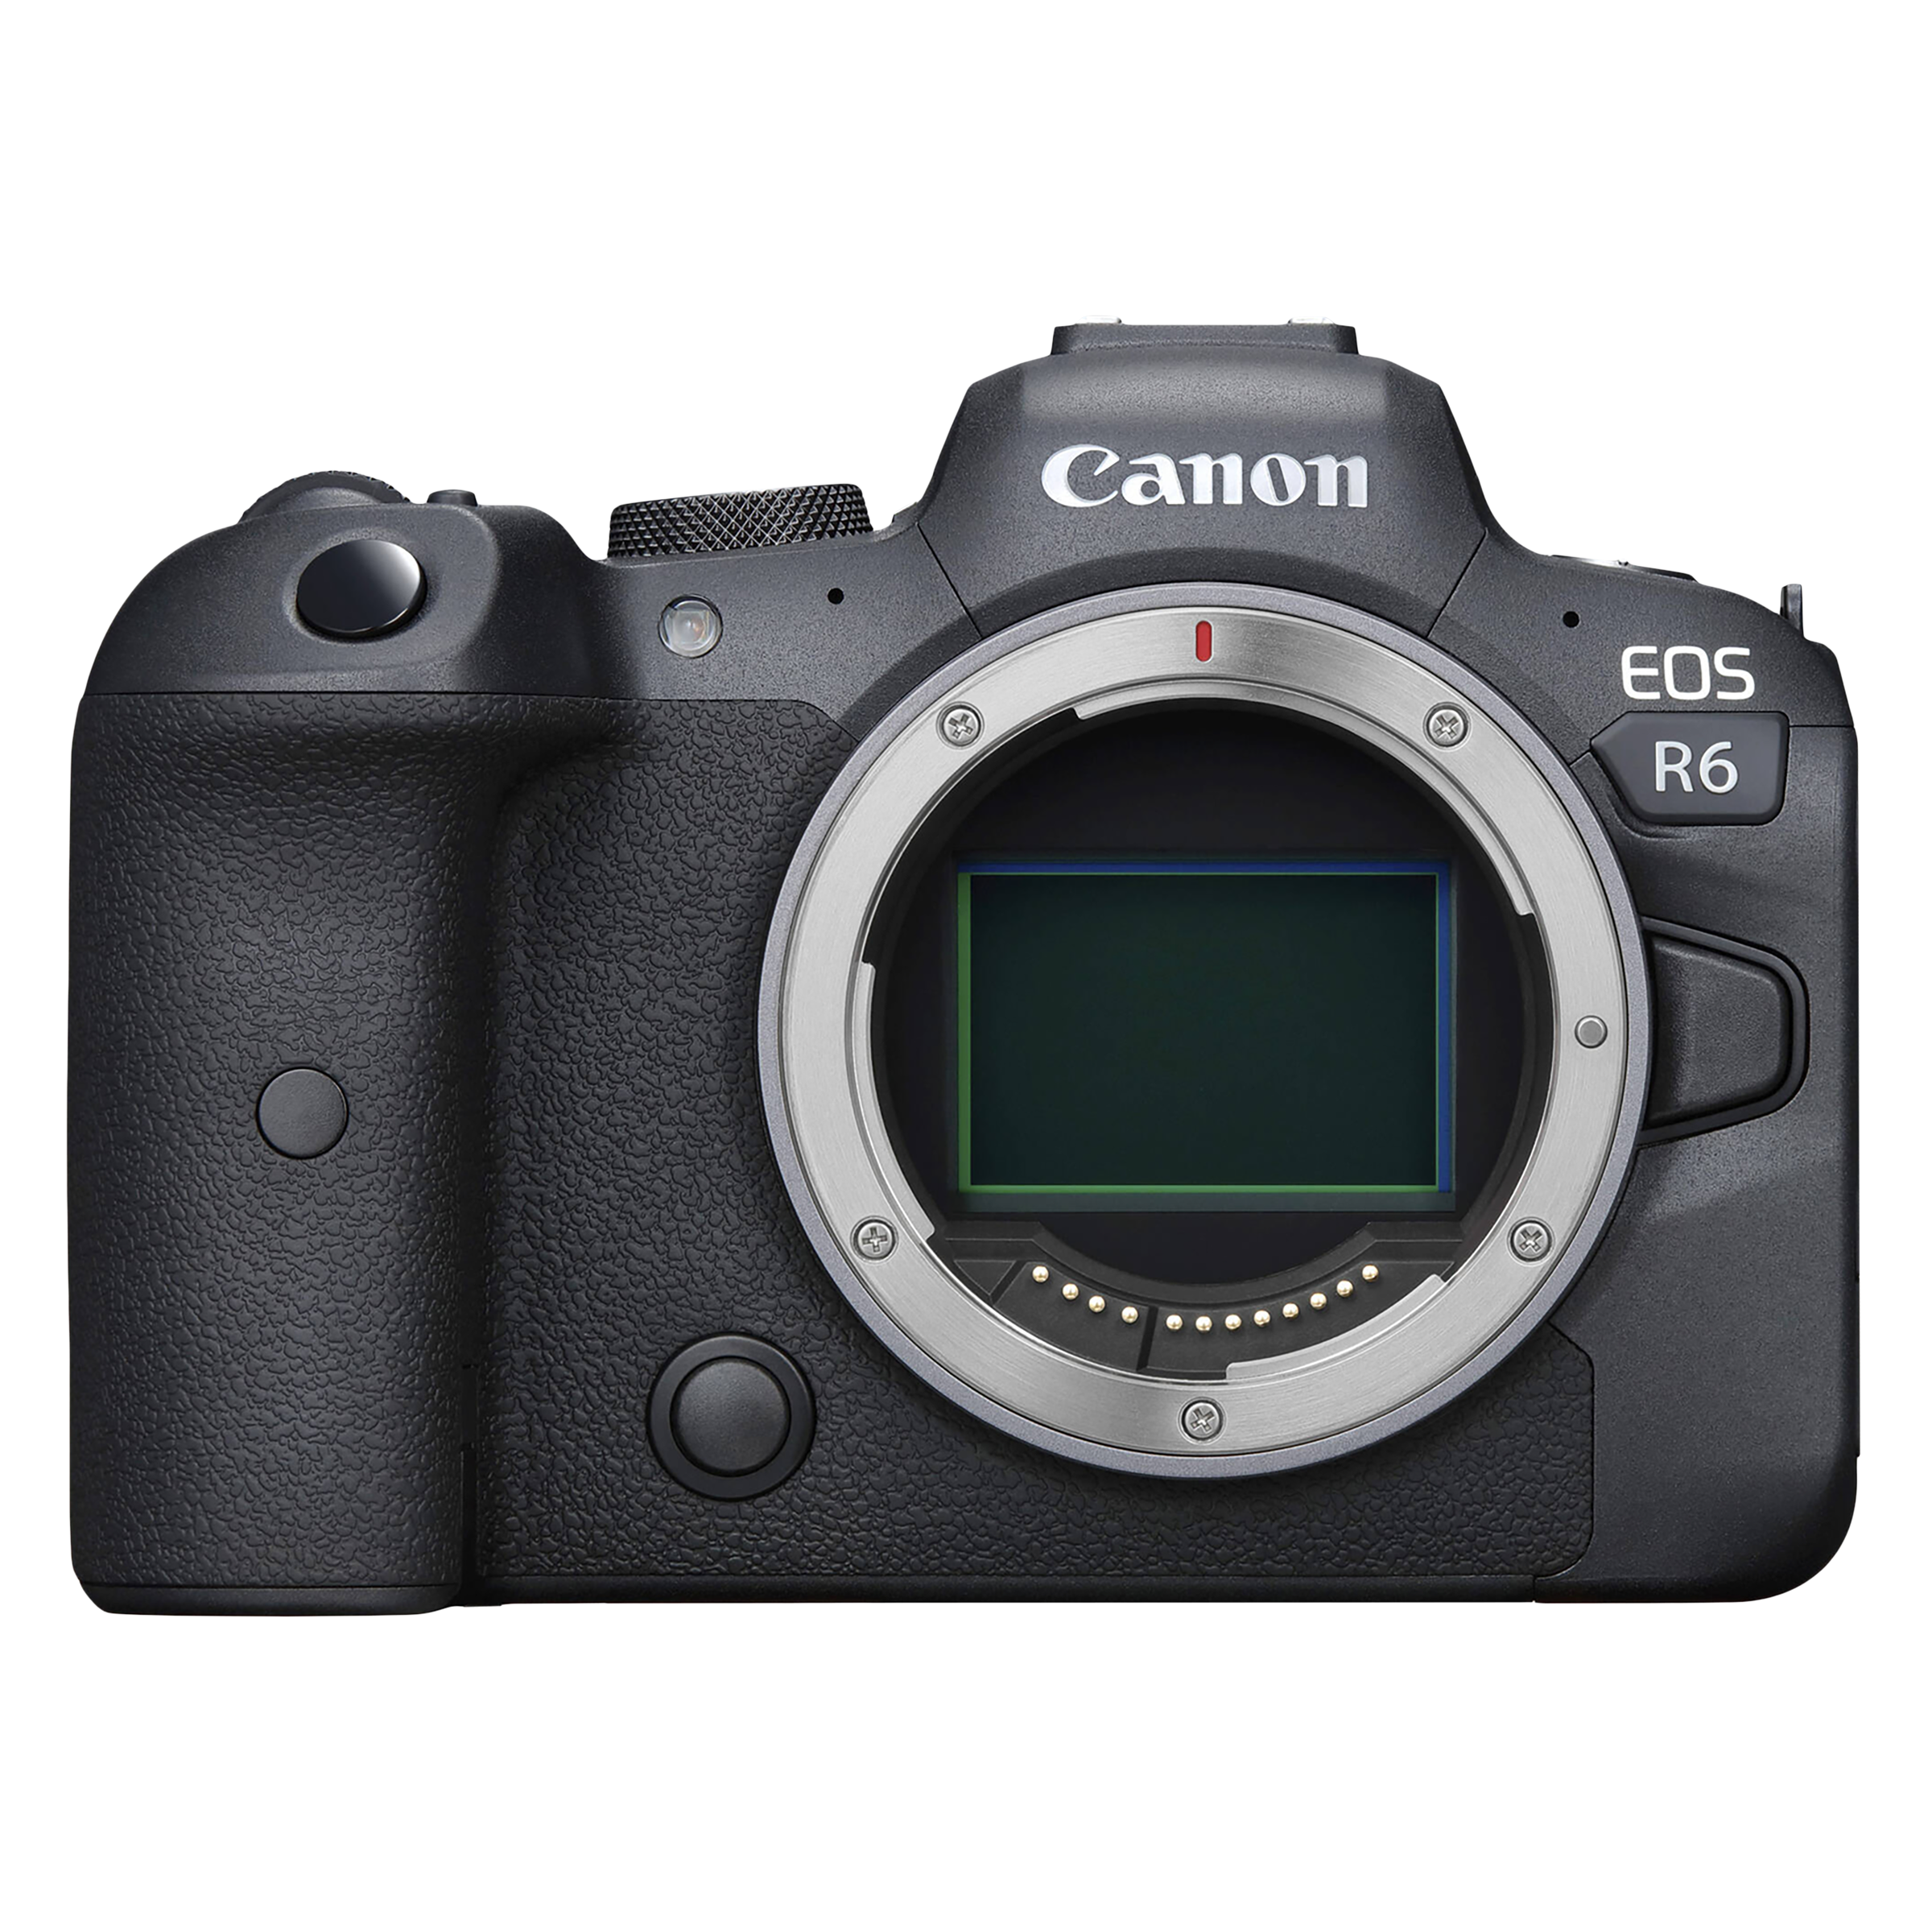 Canon EOS R6 20.1MP Mirrorless Camera (Body Only, 36 x 24 mm Sensor, Vari-Angle Touch Screen LCD)